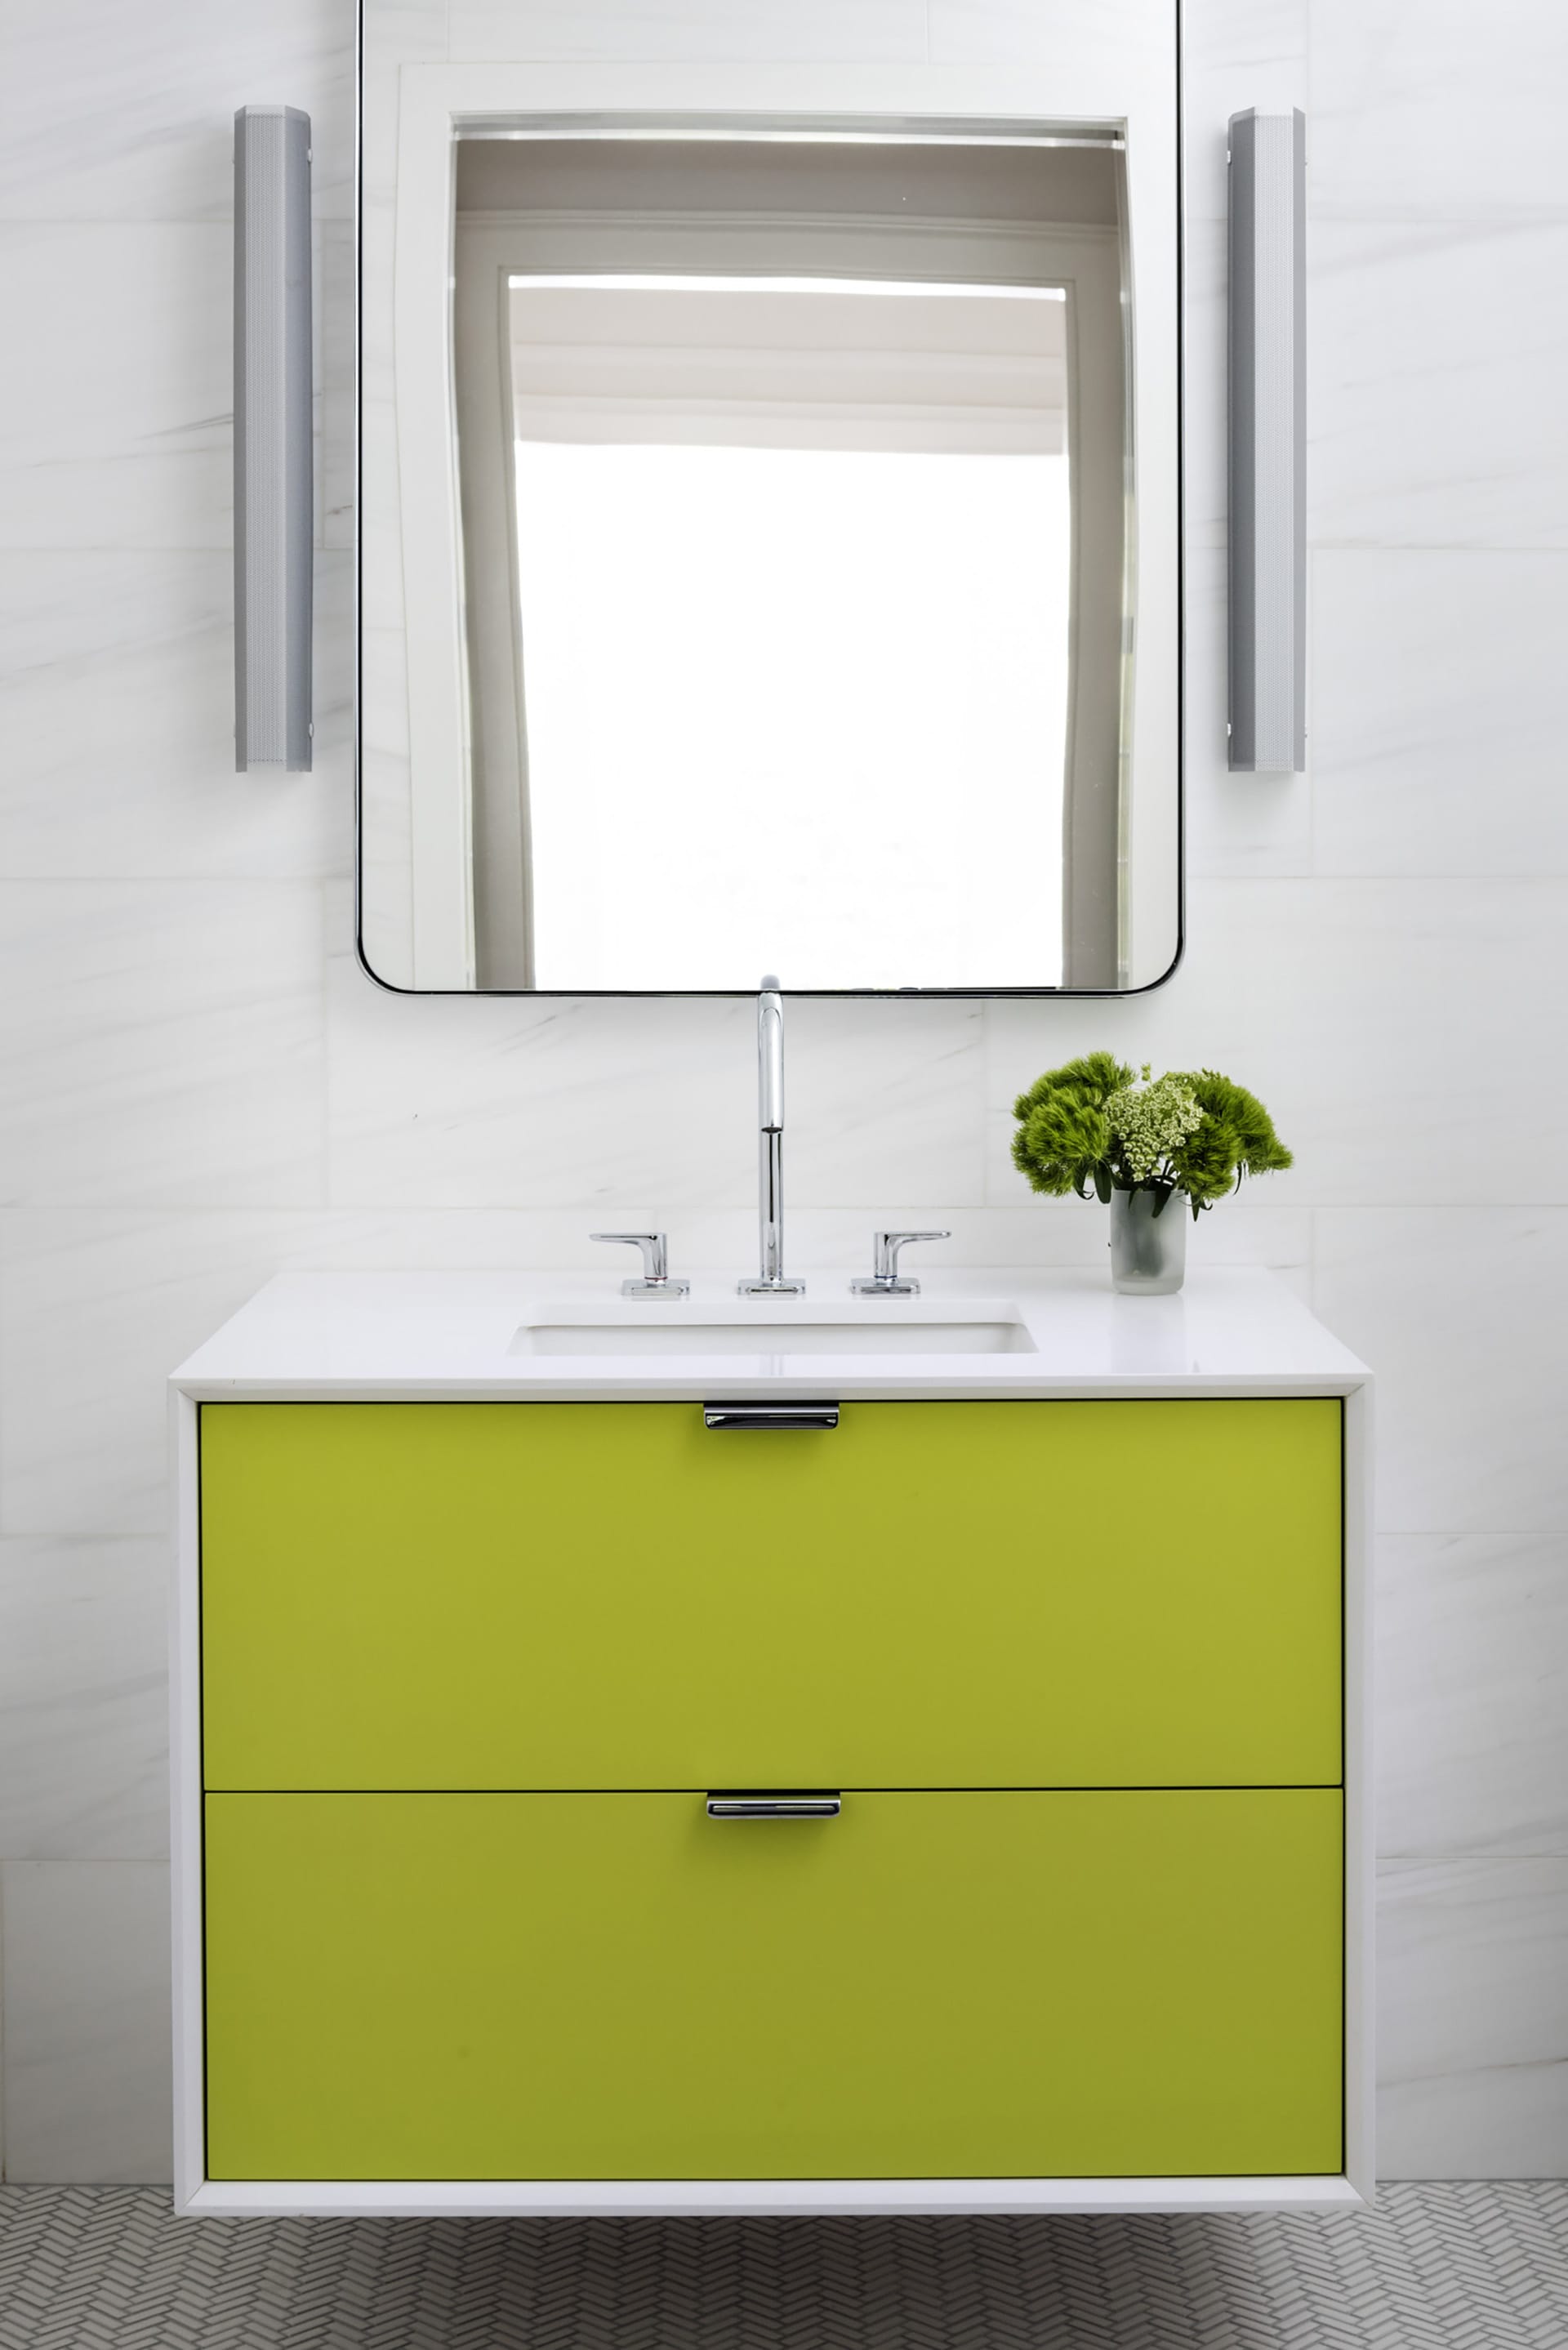 Floating vanity in an all-white bathroom with lime green drawers